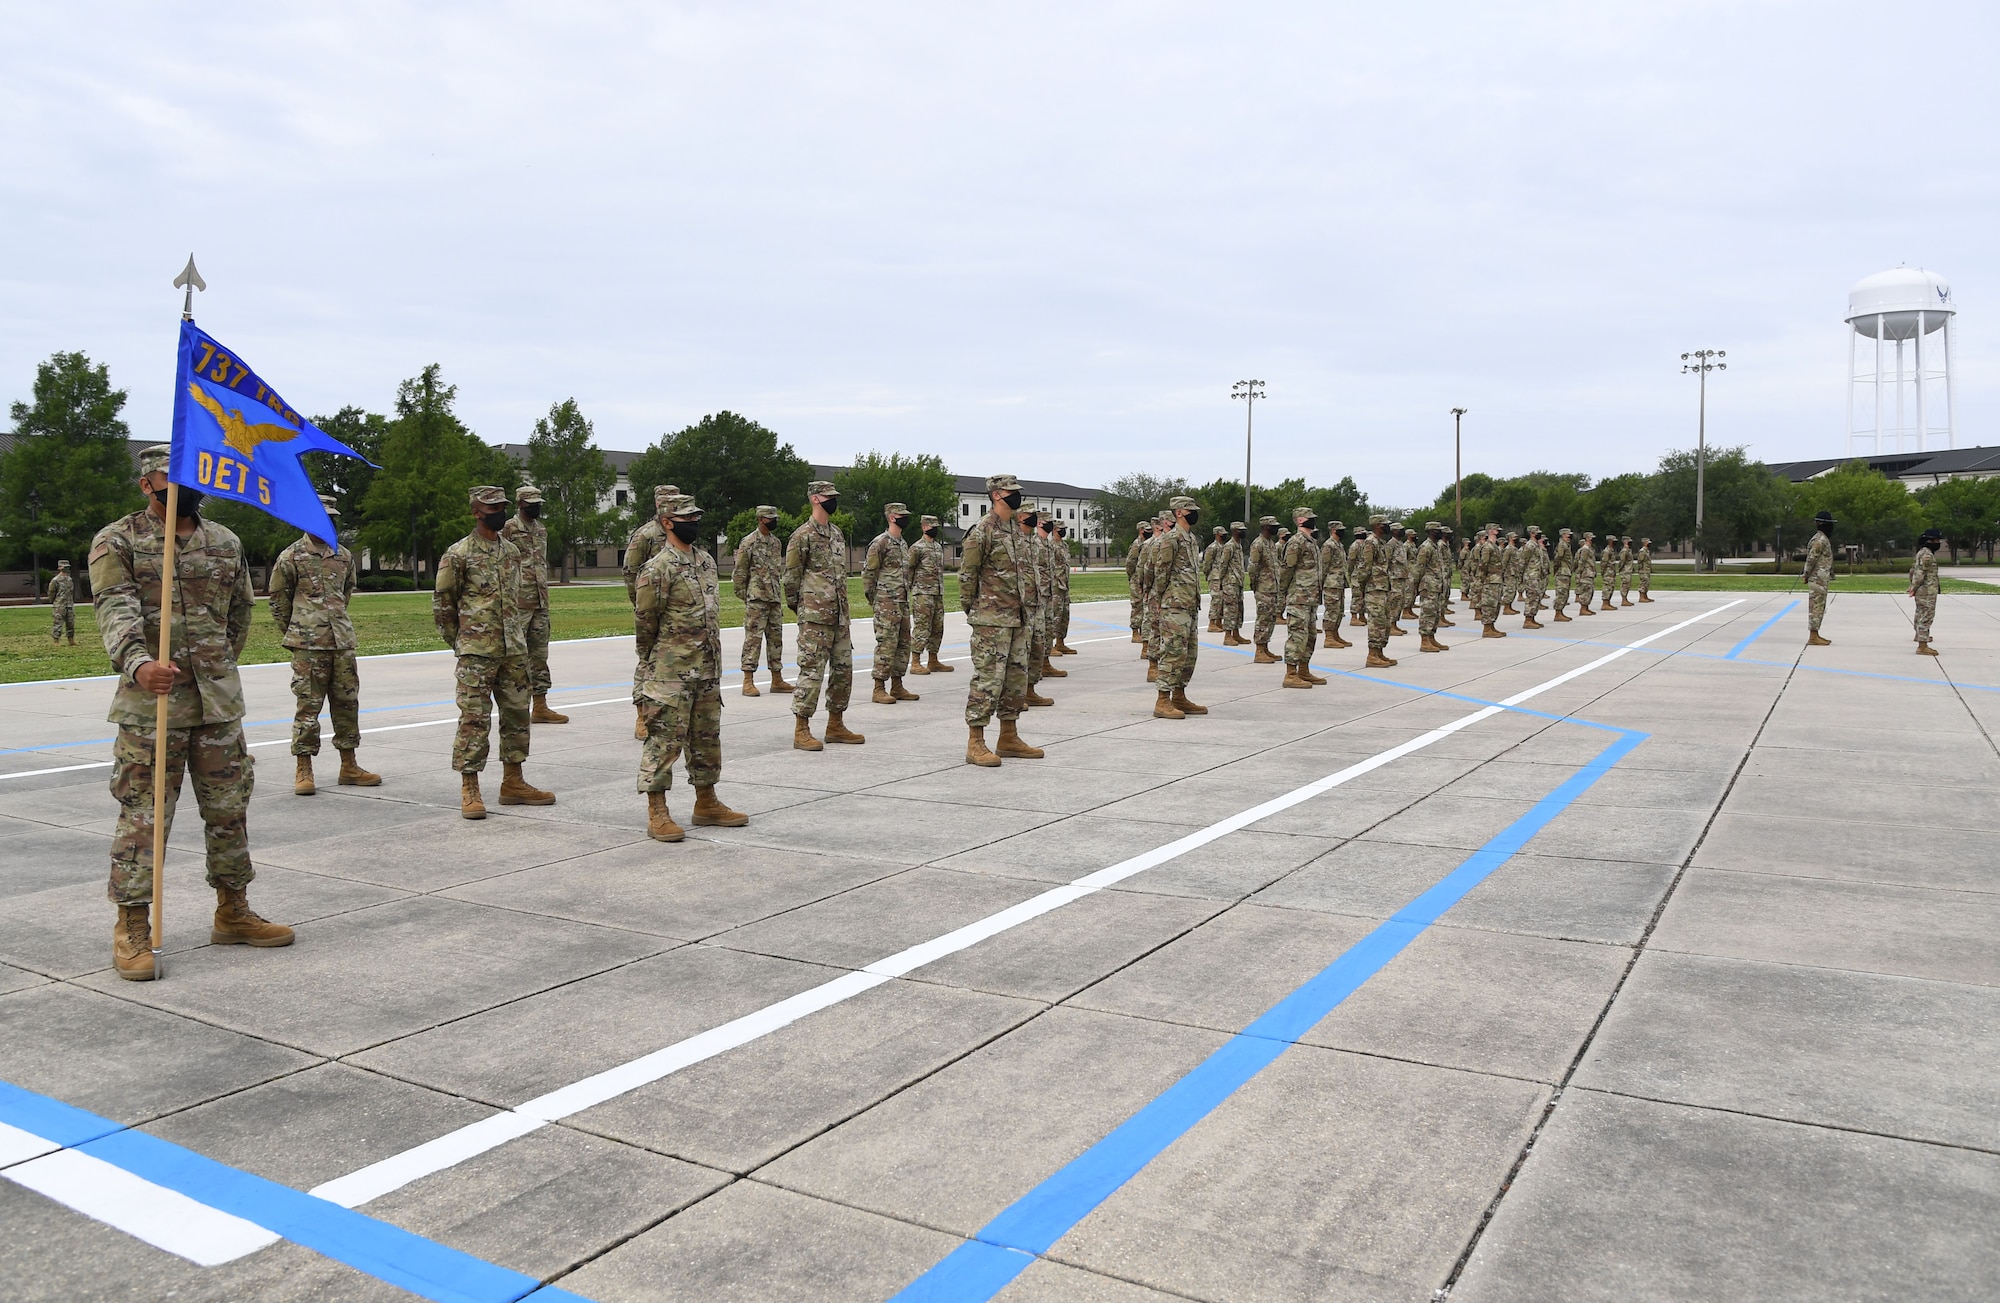 Graduating Airmen stand in formation on the drill pad during the basic military training graduation ceremony at Keesler Air Force Base, Mississippi, May 15, 2020. Nearly 60 Airmen from the 37th Training Wing Detachment 5 completed the six-week basic military training course. Due to safety concerns stemming from COVID-19, the Air Force sent new recruits to Keesler to demonstrate a proof of concept to generate the force at multiple locations during contingencies. The flight was the first to graduate BMT at Keesler since 1968. (U.S. Air Force photo by Kemberly Groue)